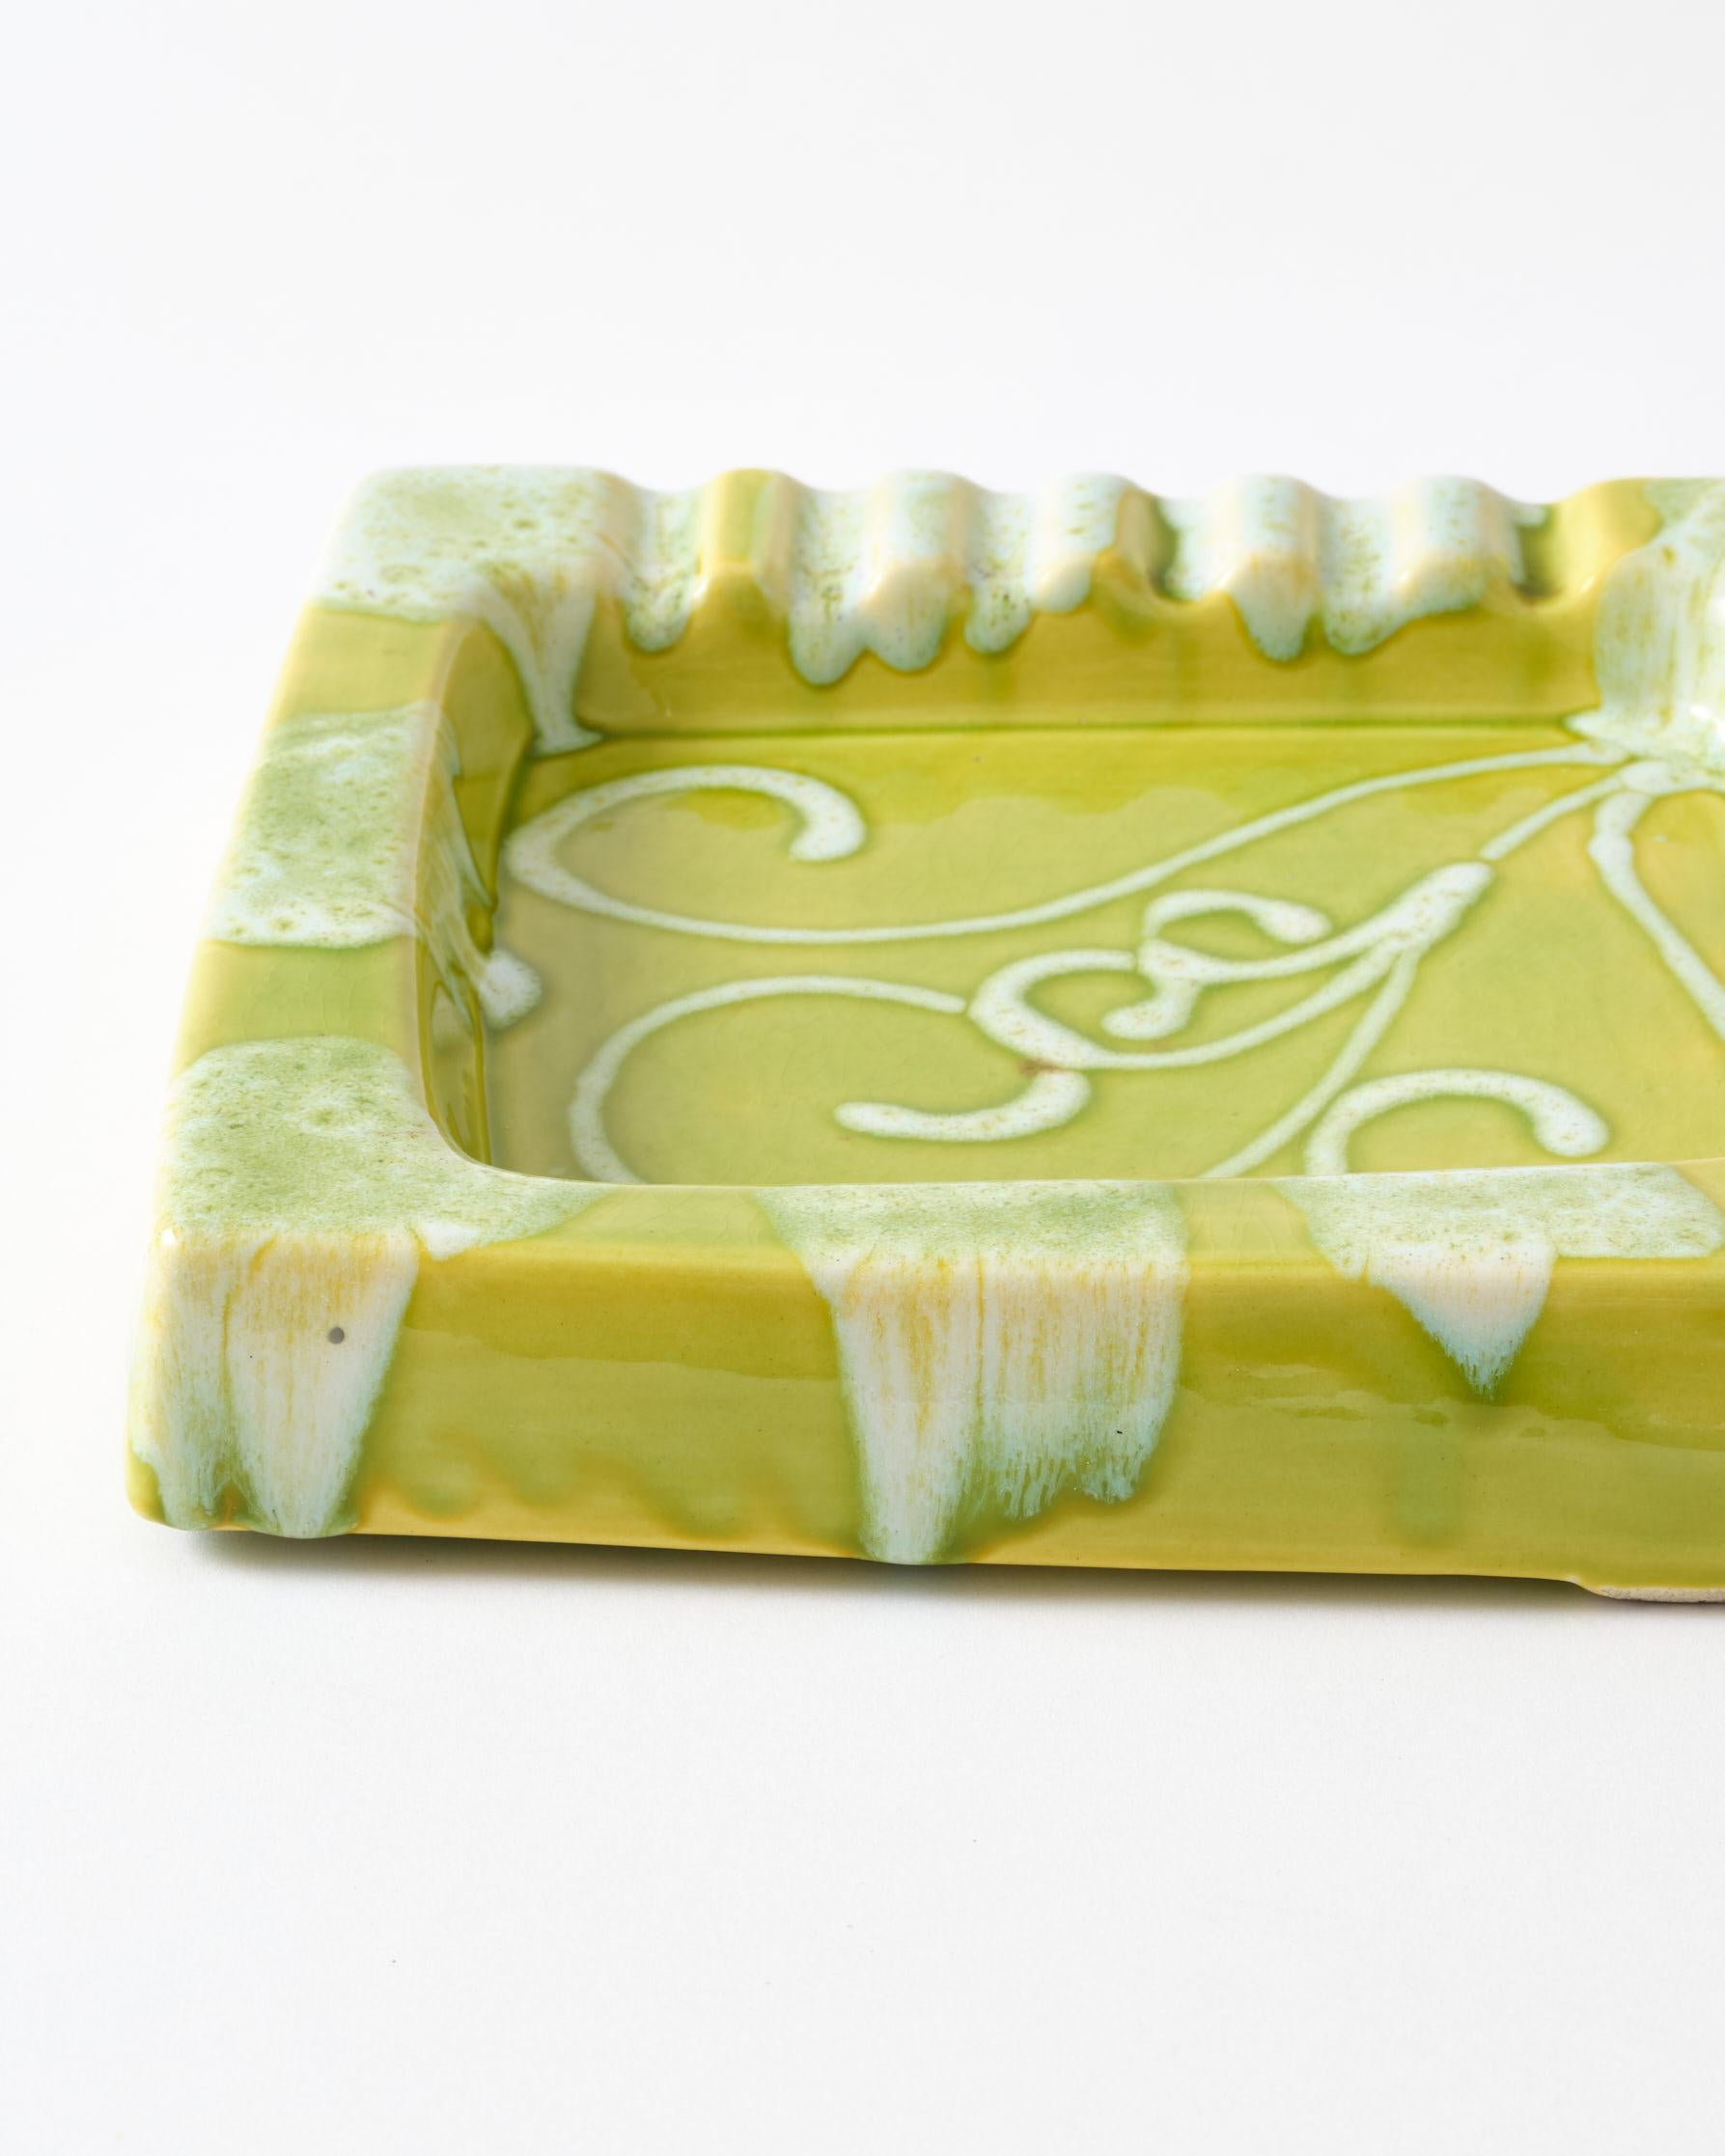 Ceramic Ashtray, Lime Green With White Details, Italy, C 1950, Vintage Ashtray For Sale 2